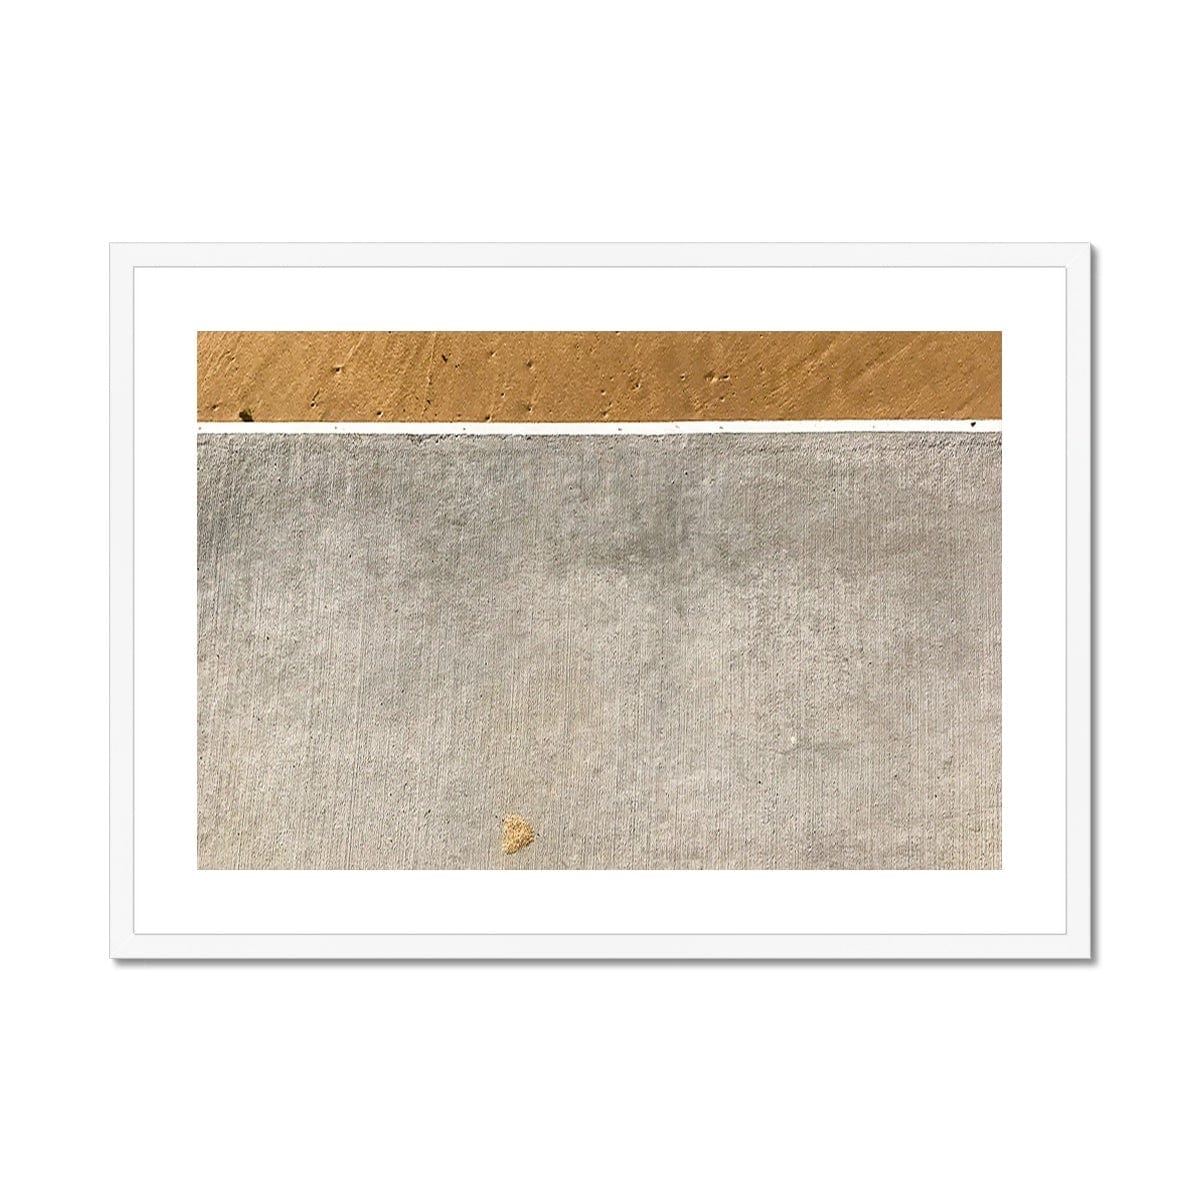 Adam Davies Framed A4 Landscape (29x21cm) / White Frame Natures Abstract Sand Lines Framed & Mounted Print